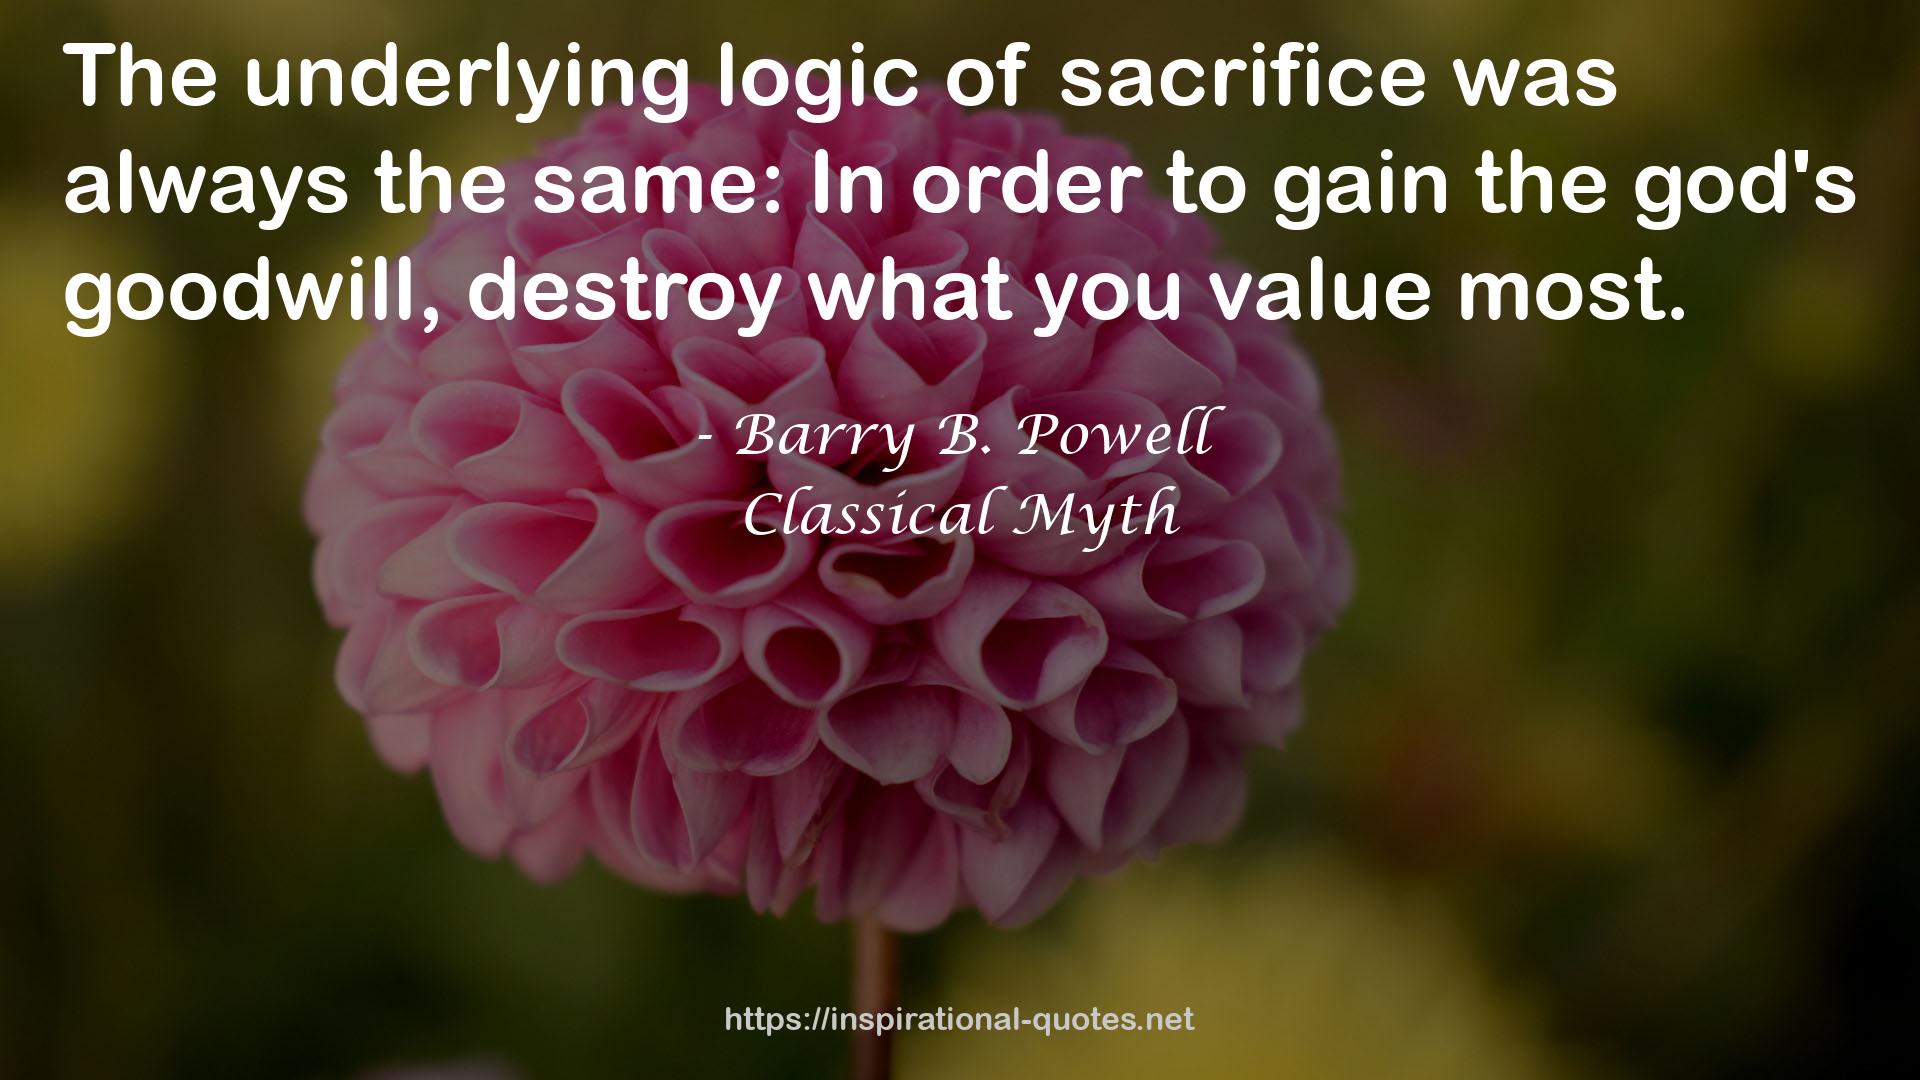 Classical Myth QUOTES